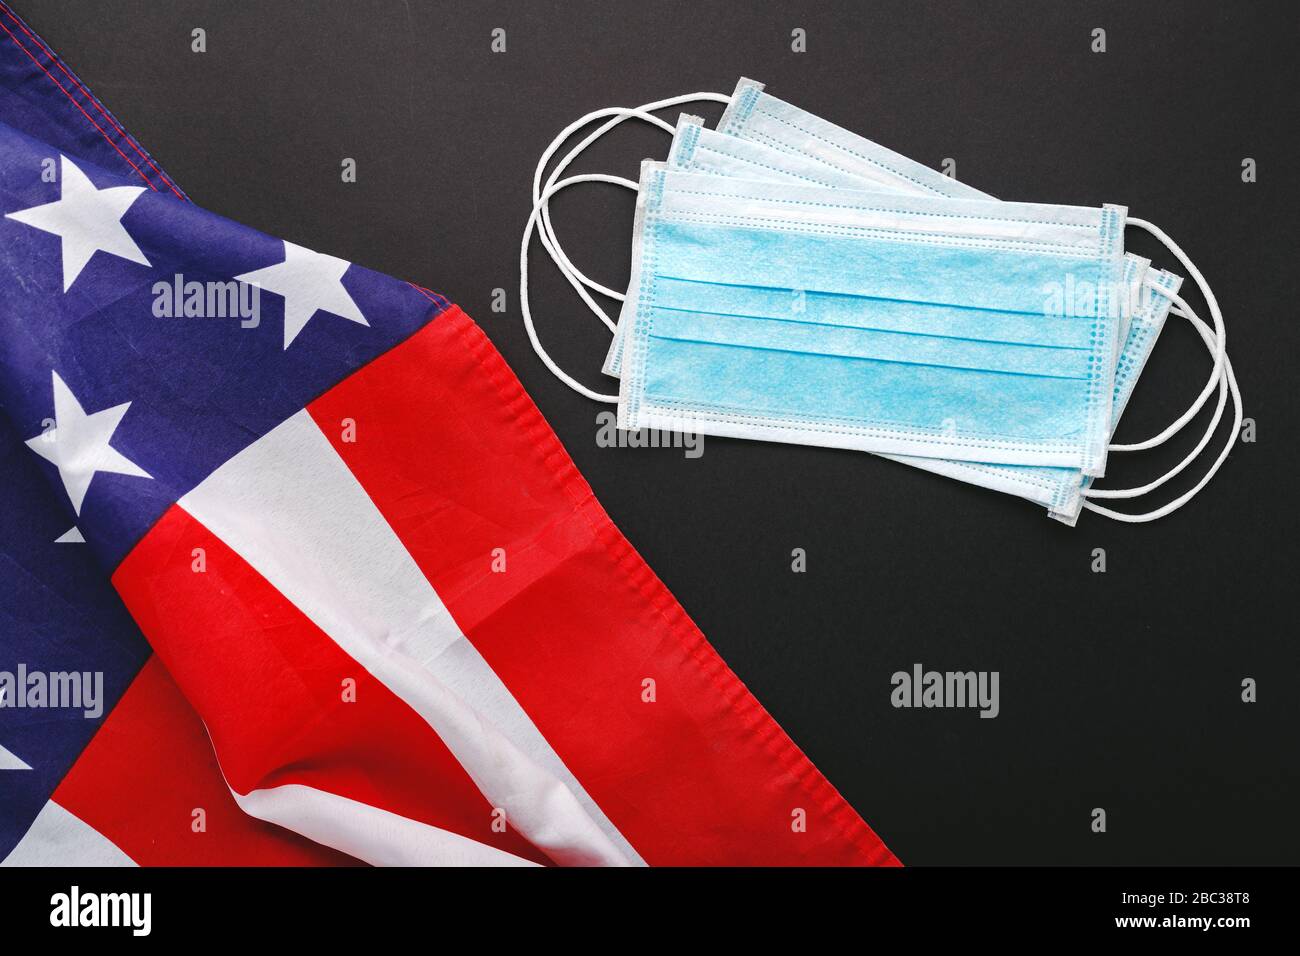 Coronavirus in USA death from coronavirus. Protective surgical face mask on black background with American national flag. Medicine health care Stock Photo